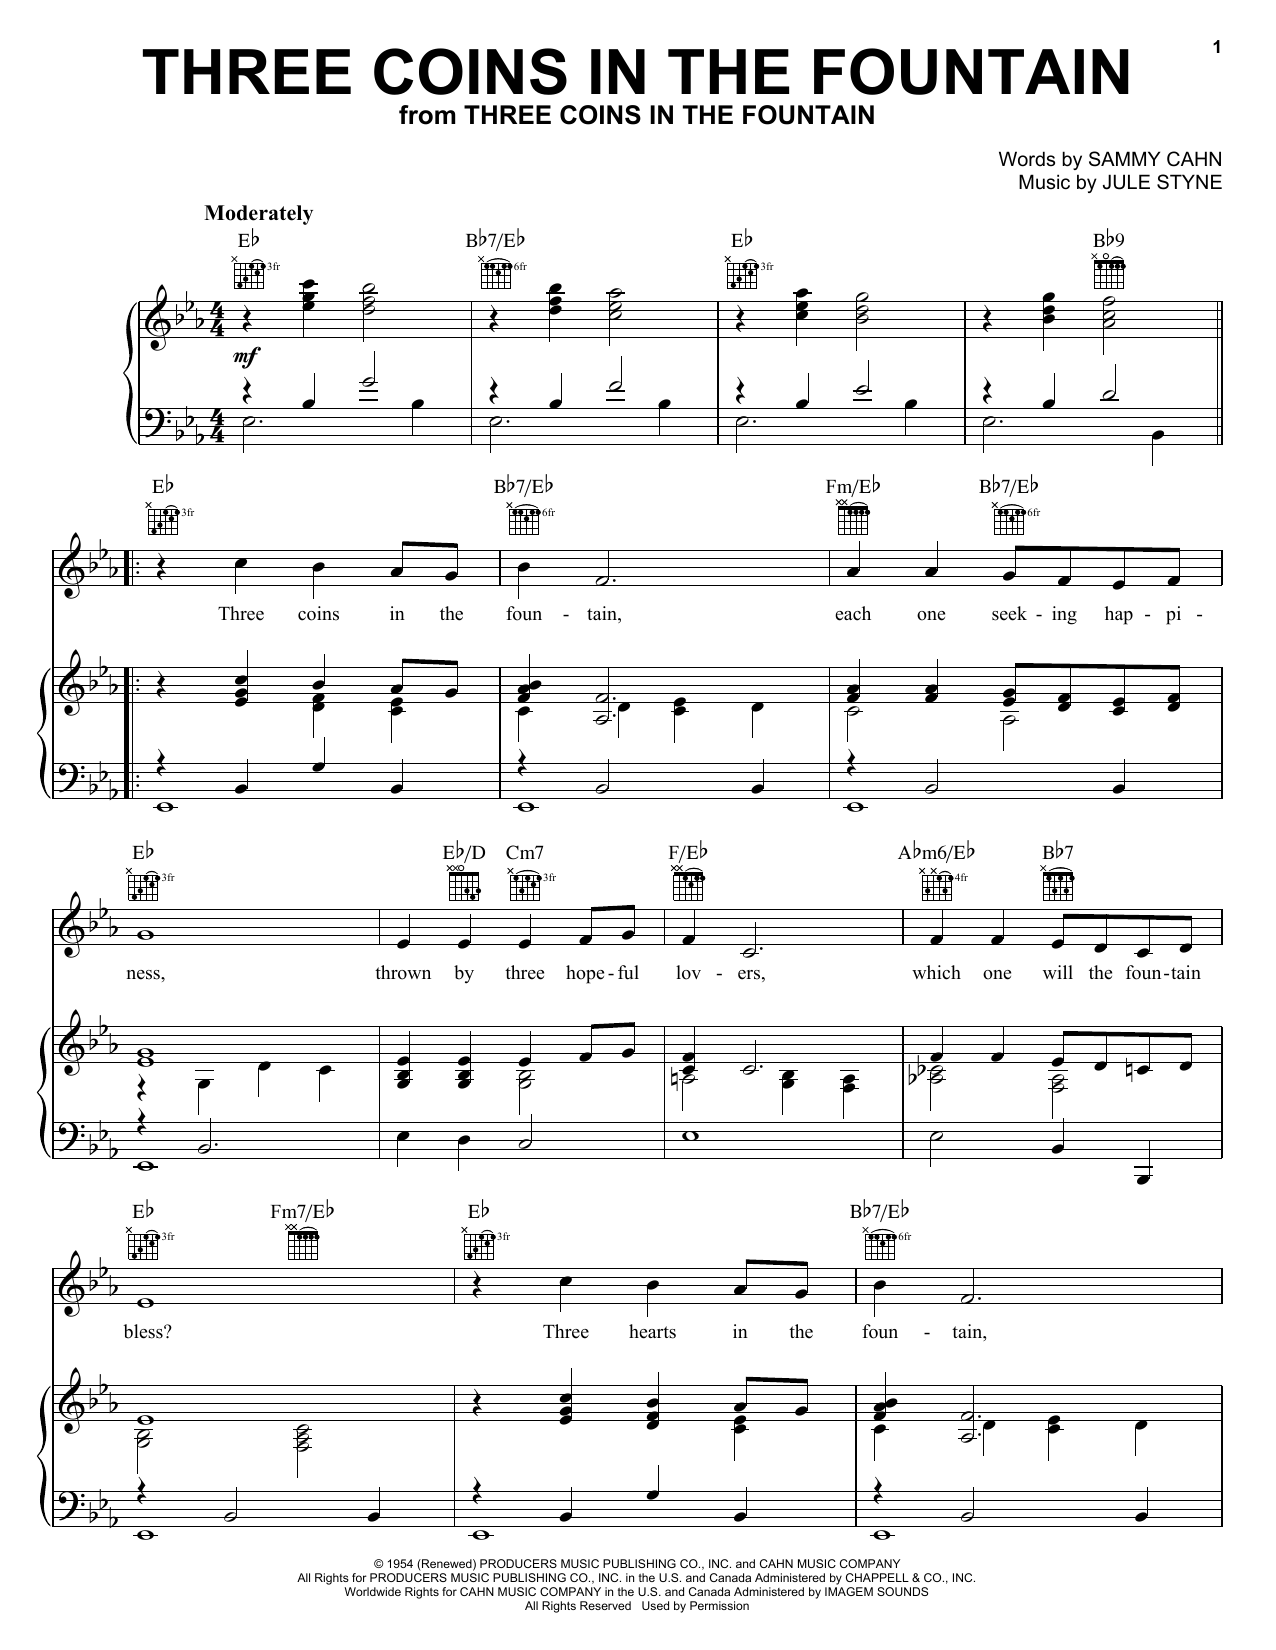 Frank Sinatra Three Coins In The Fountain sheet music notes and chords. Download Printable PDF.